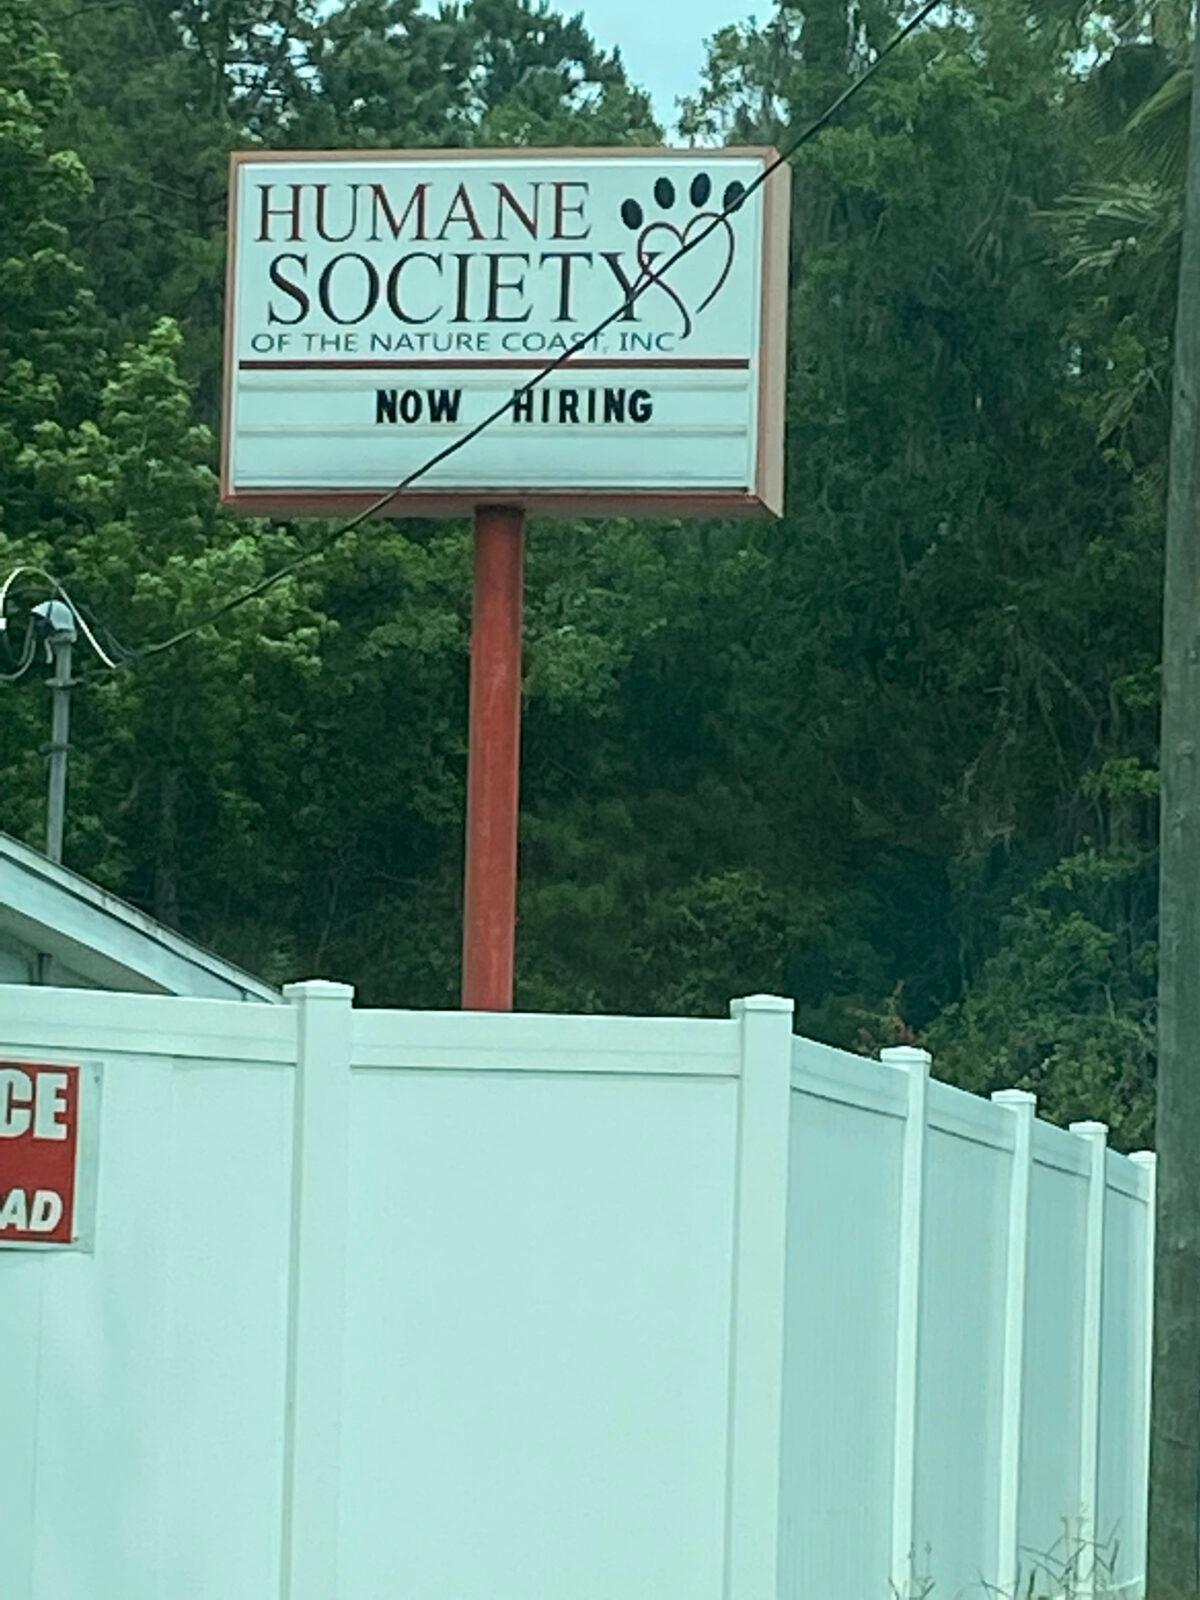 The sign at the Humane Society of the Nature Coast in Brooksville, Fla., announces they are hiring on May 27, 2022. (Patricia Tolson/The Epoch Times)